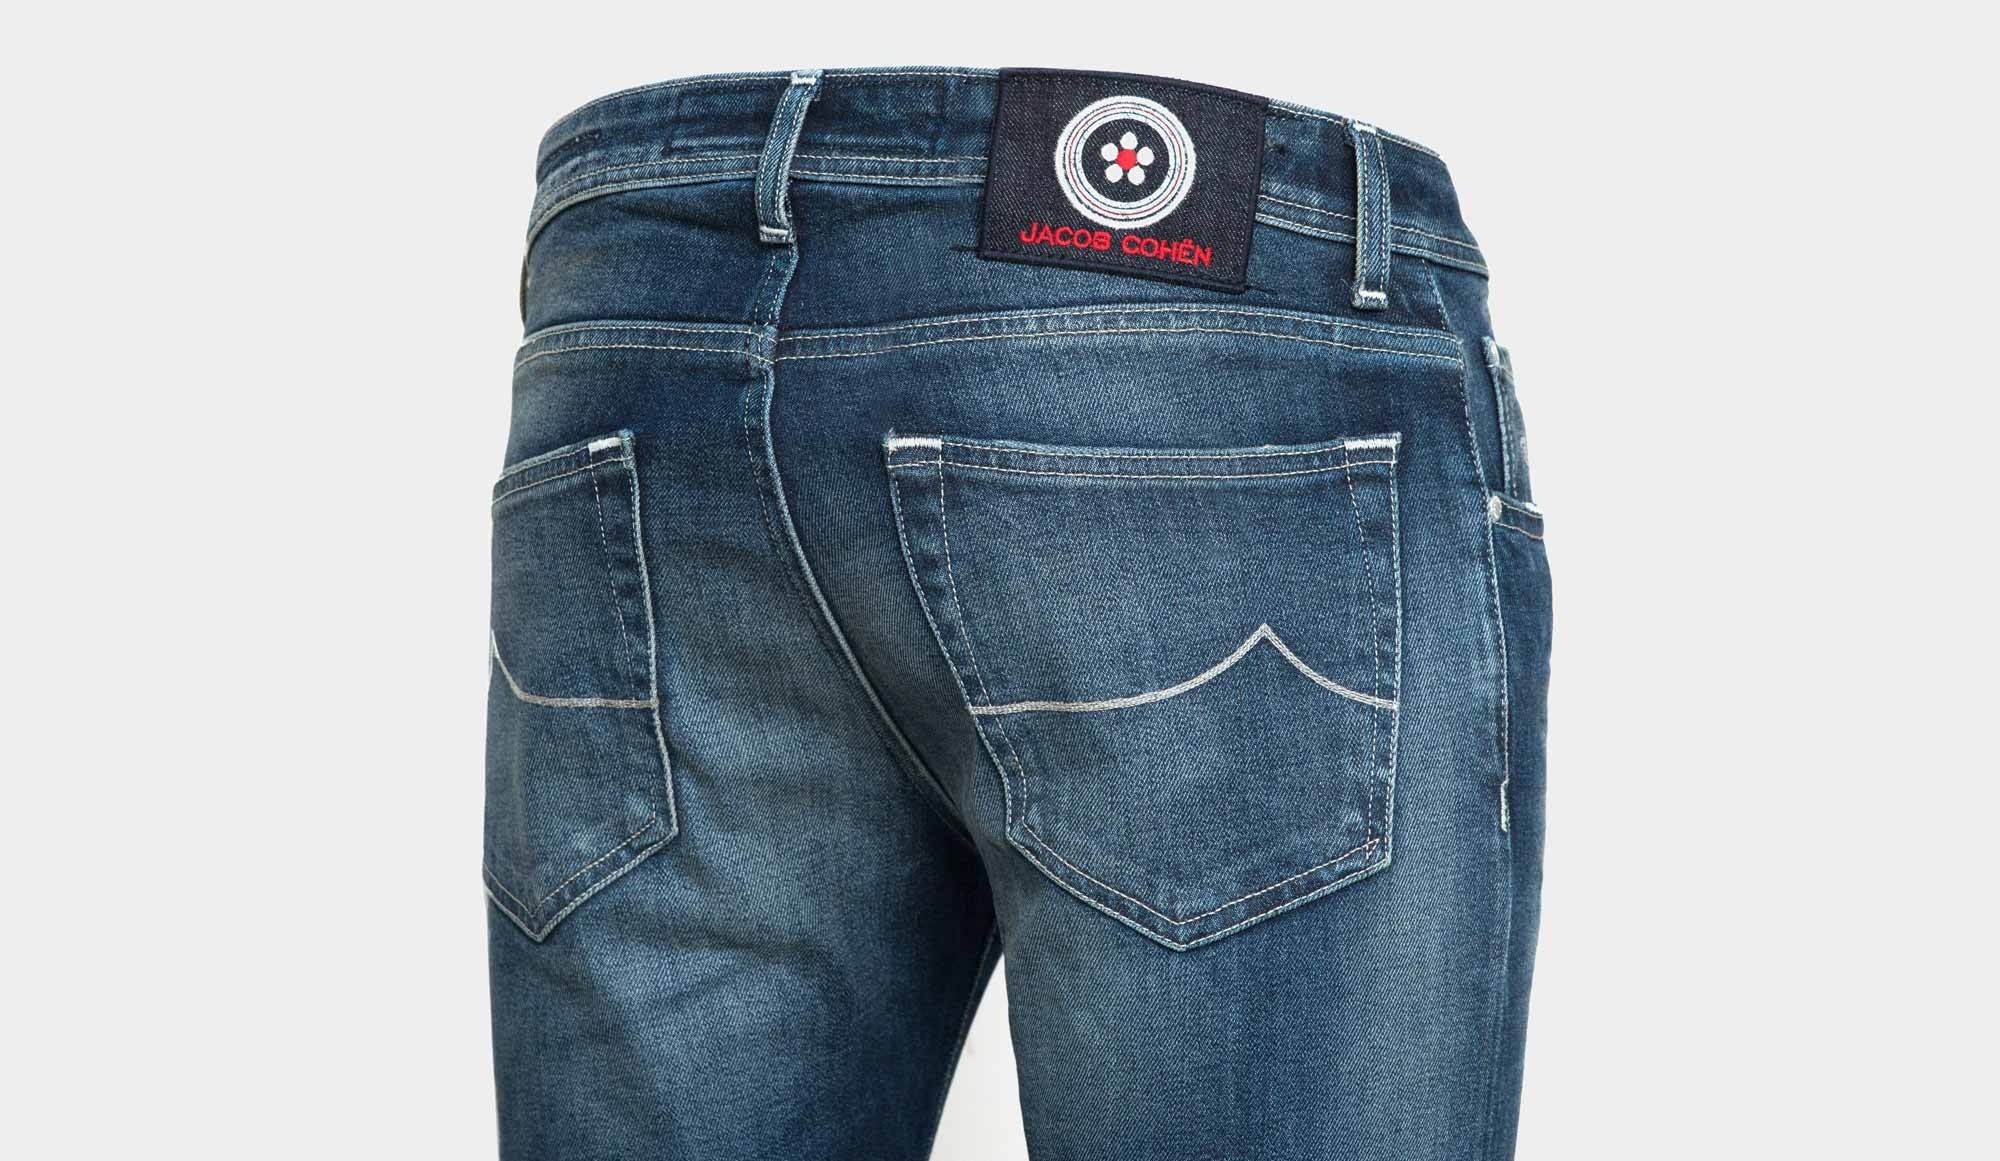 jacob and cohen jeans